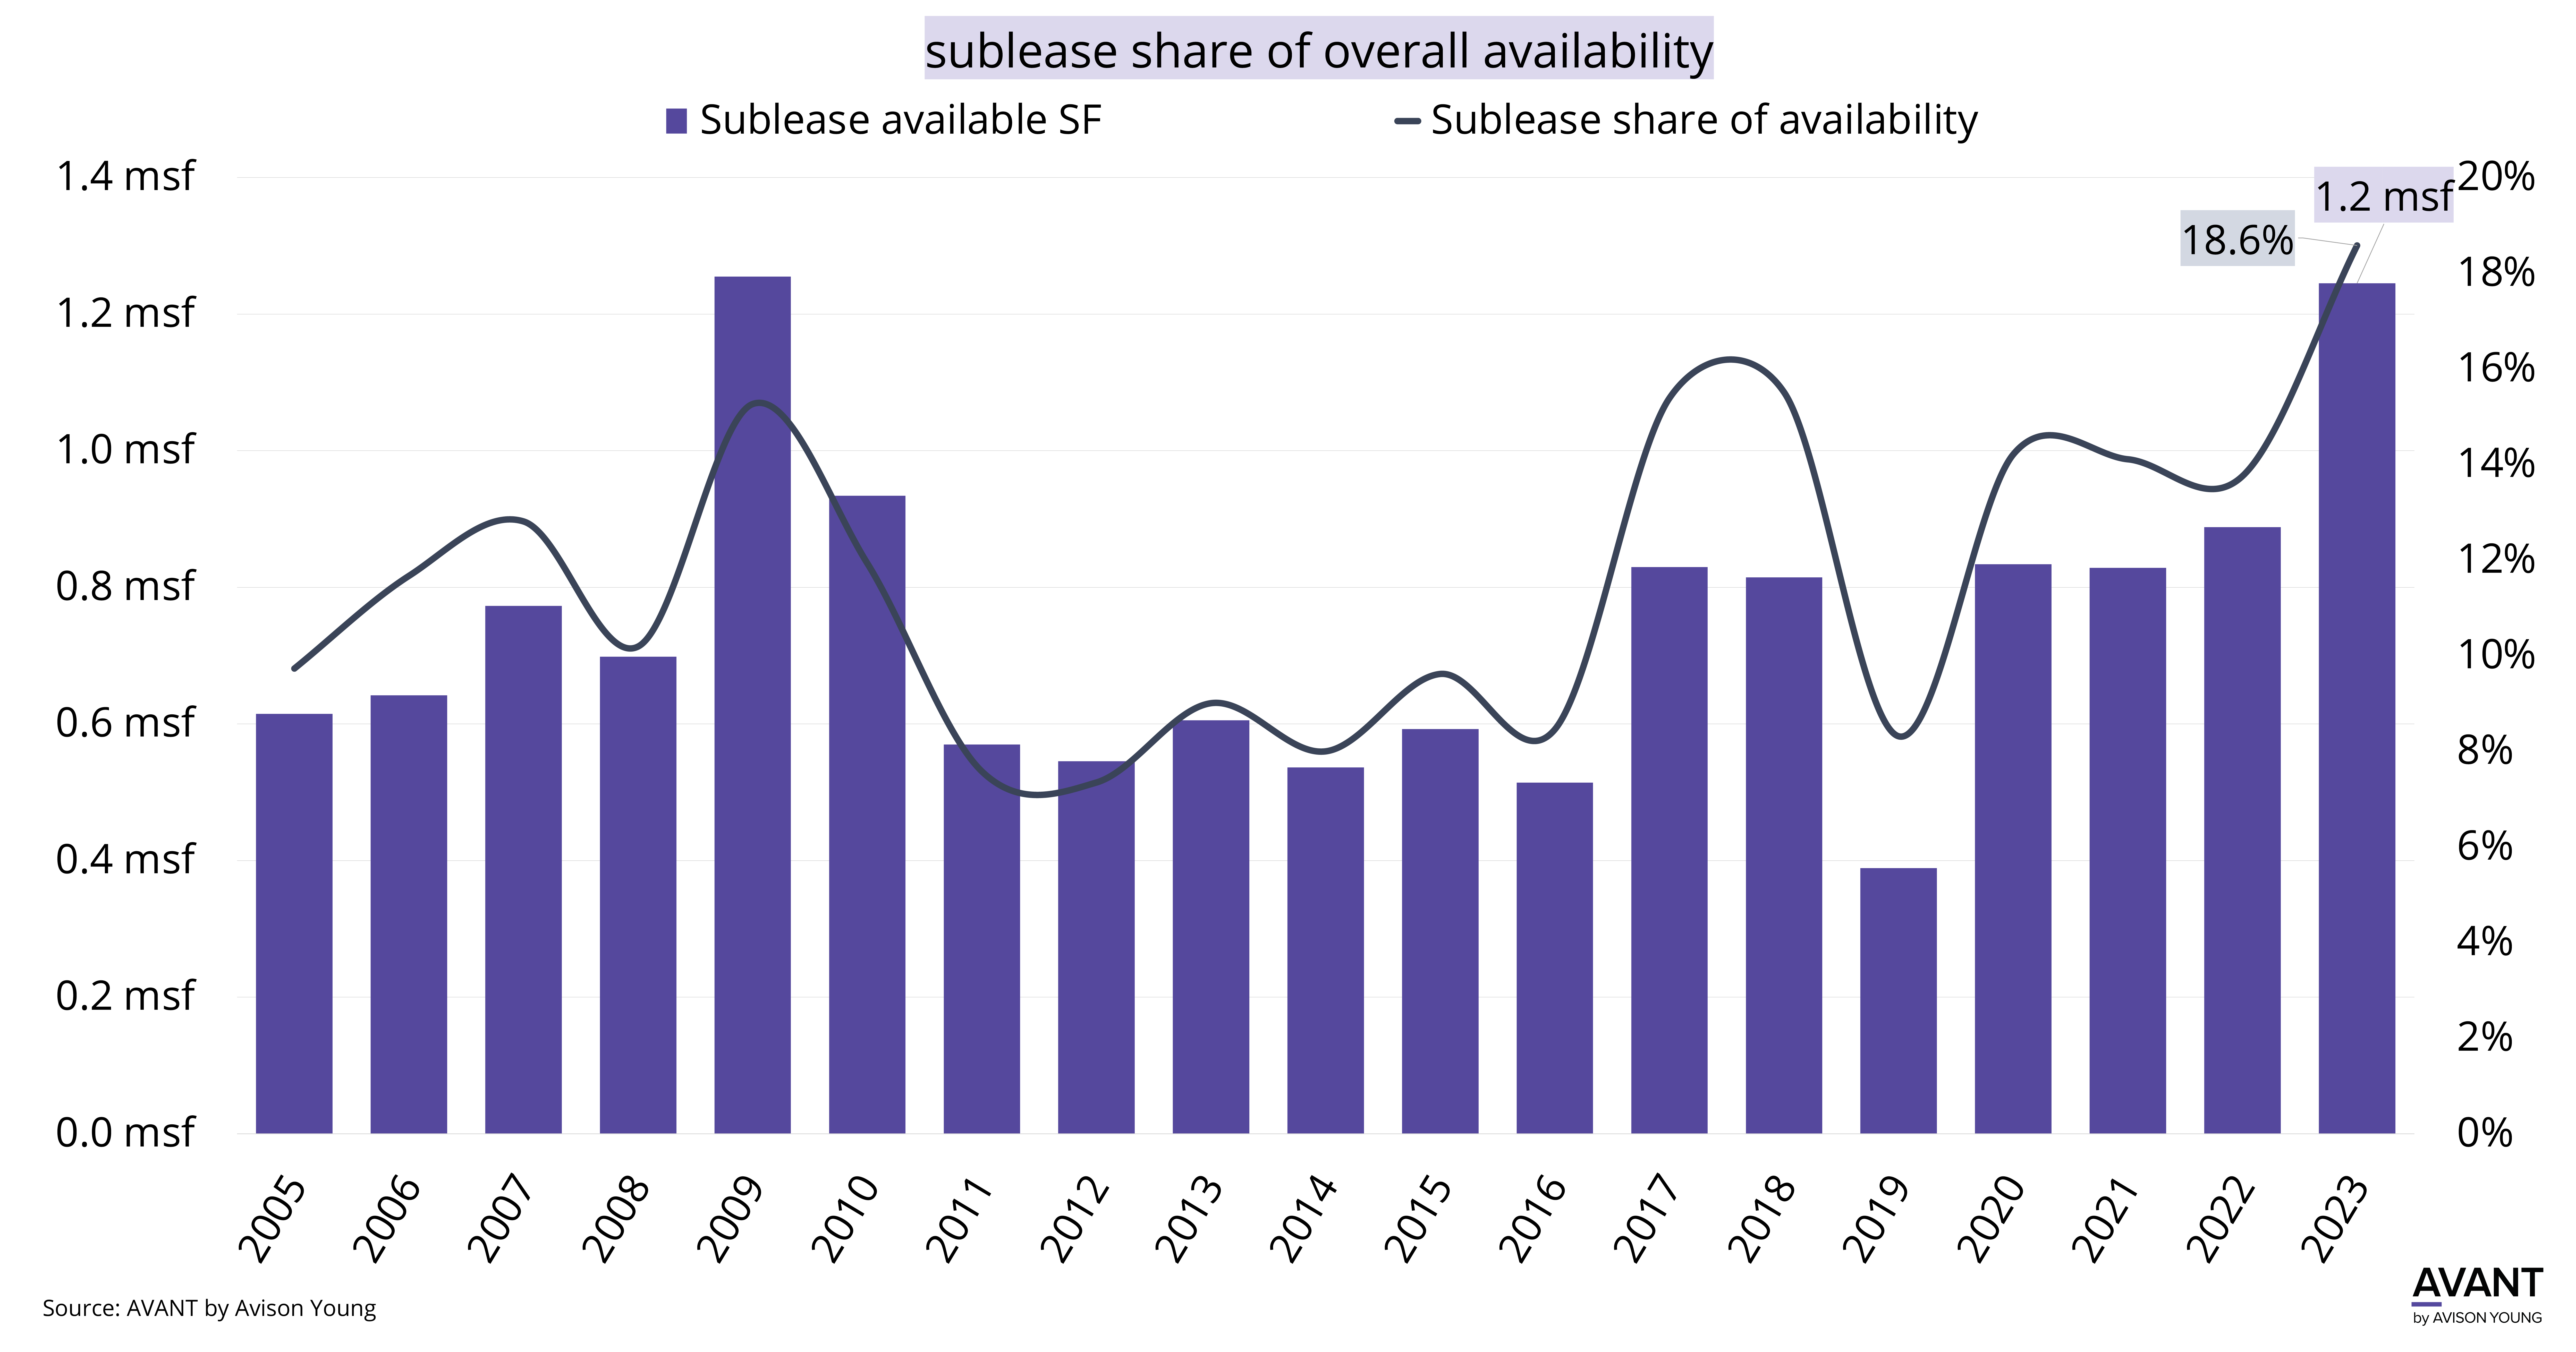 Available sublease space on the Long Island Market is approaching its post-2005 peak